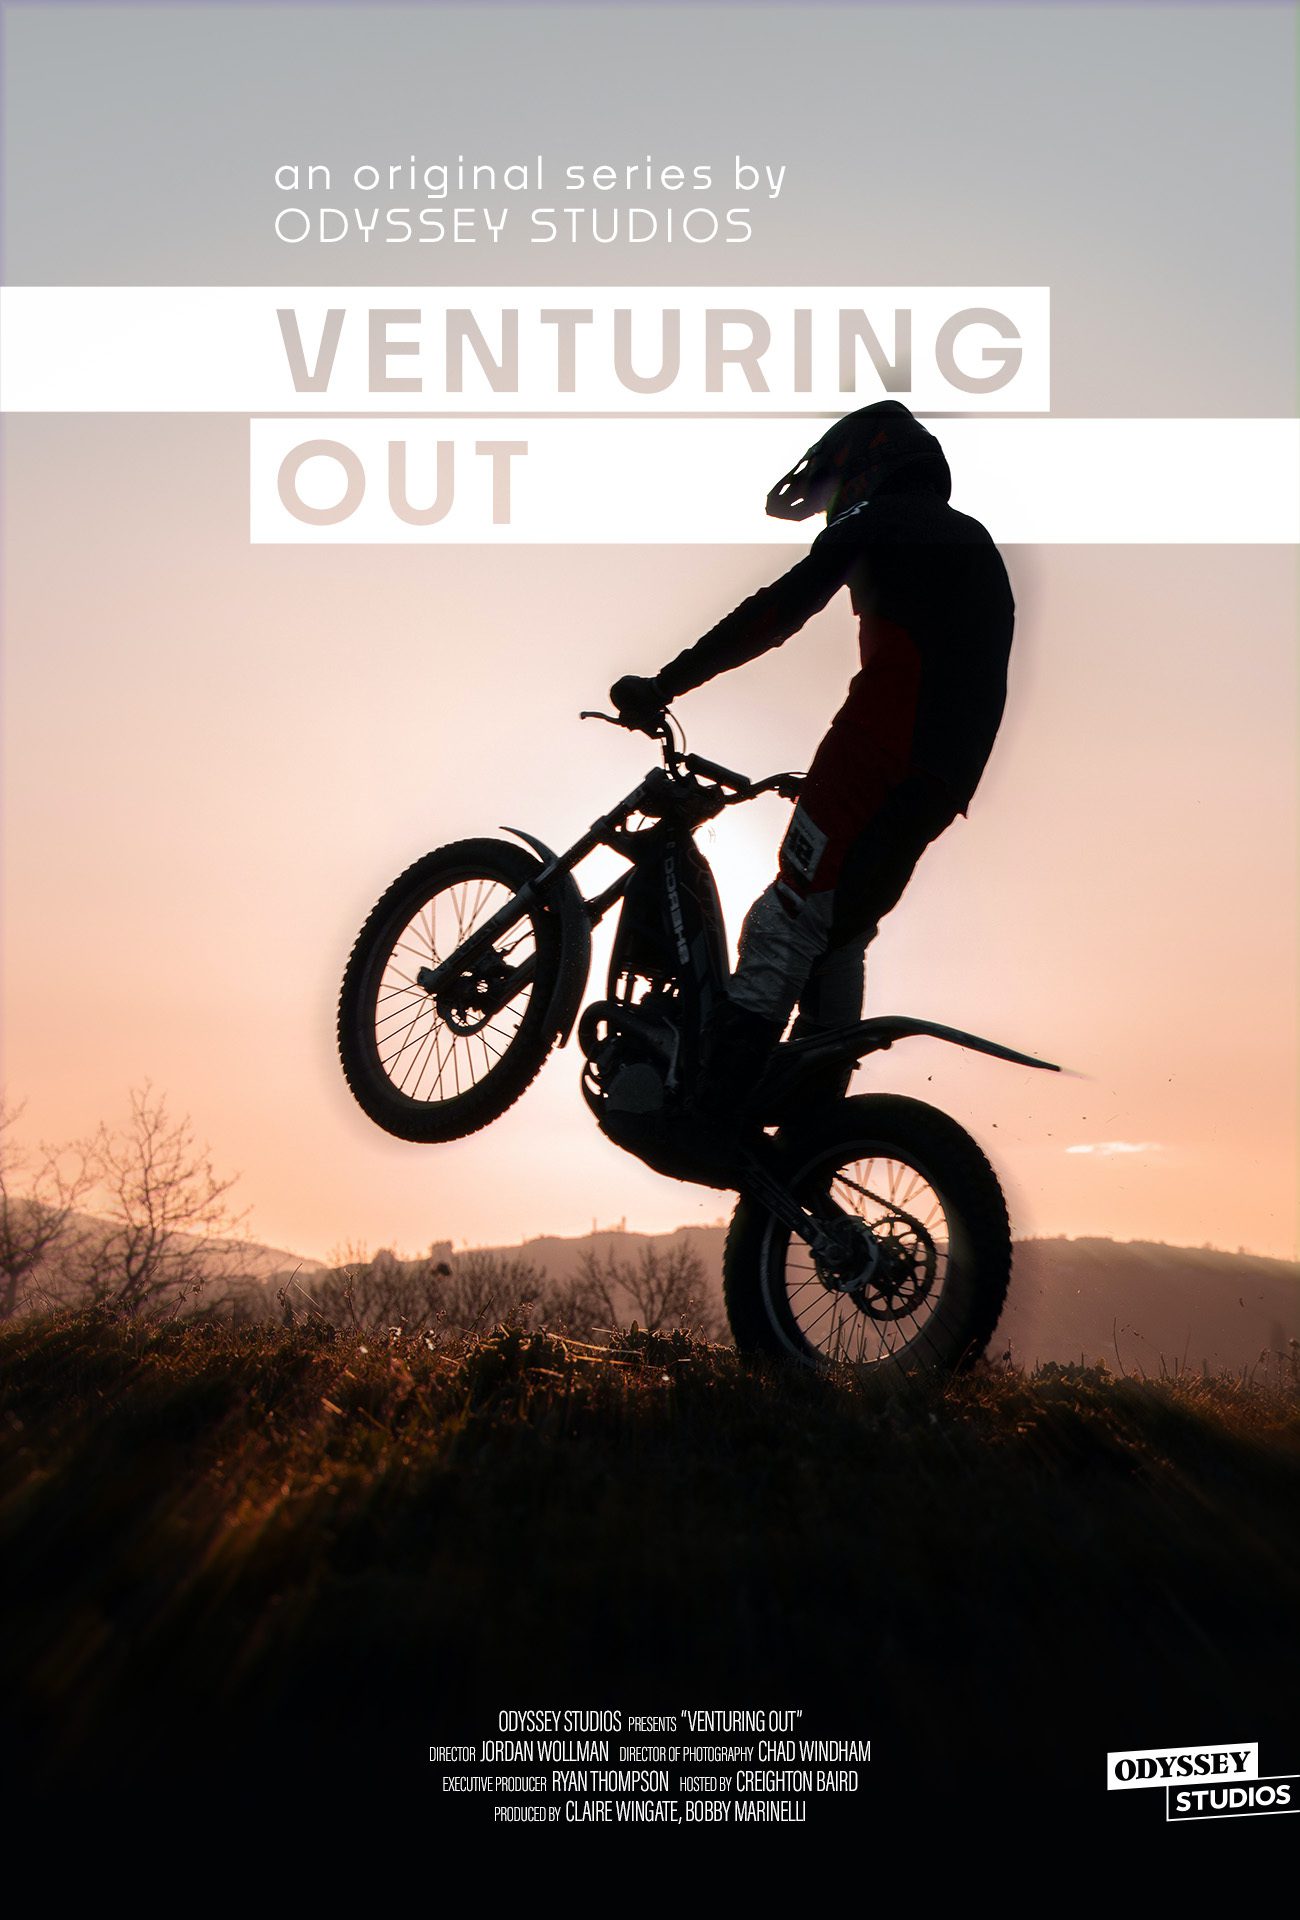 Venturing Out poster with someone making a jump on a dirt bike with the sun setting in the background